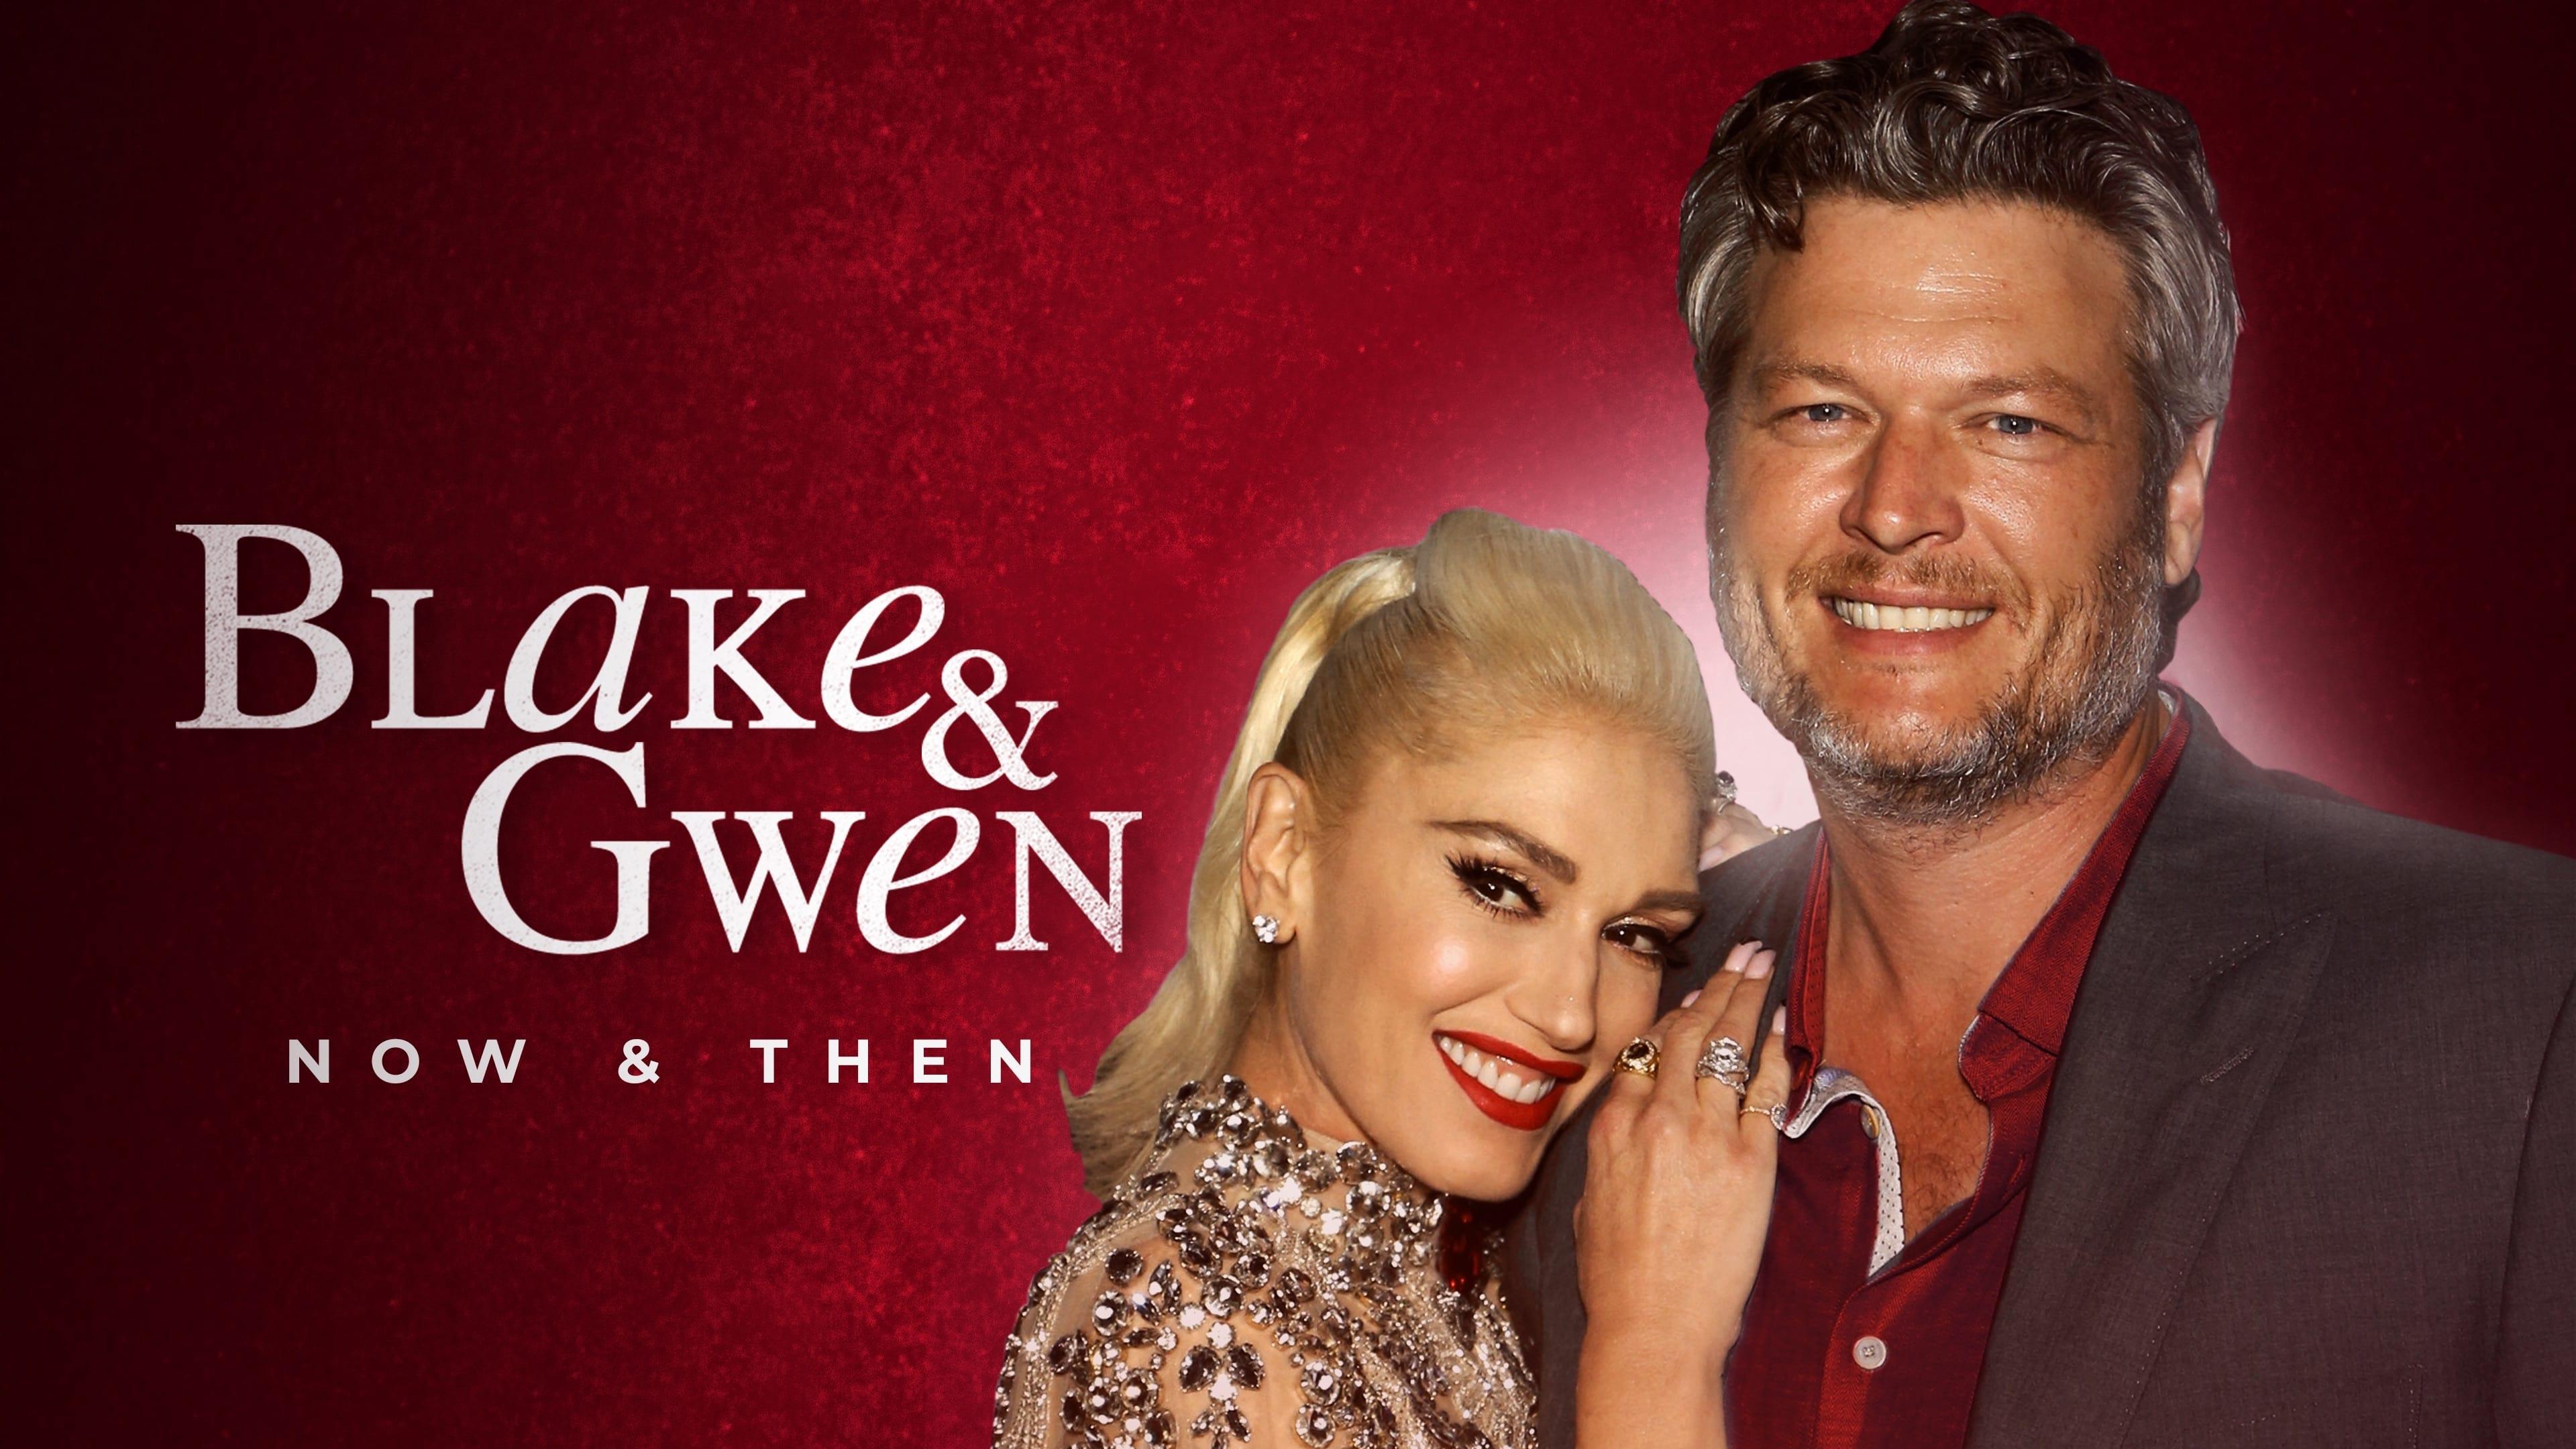 Blake and Gwen: Now and Then backdrop